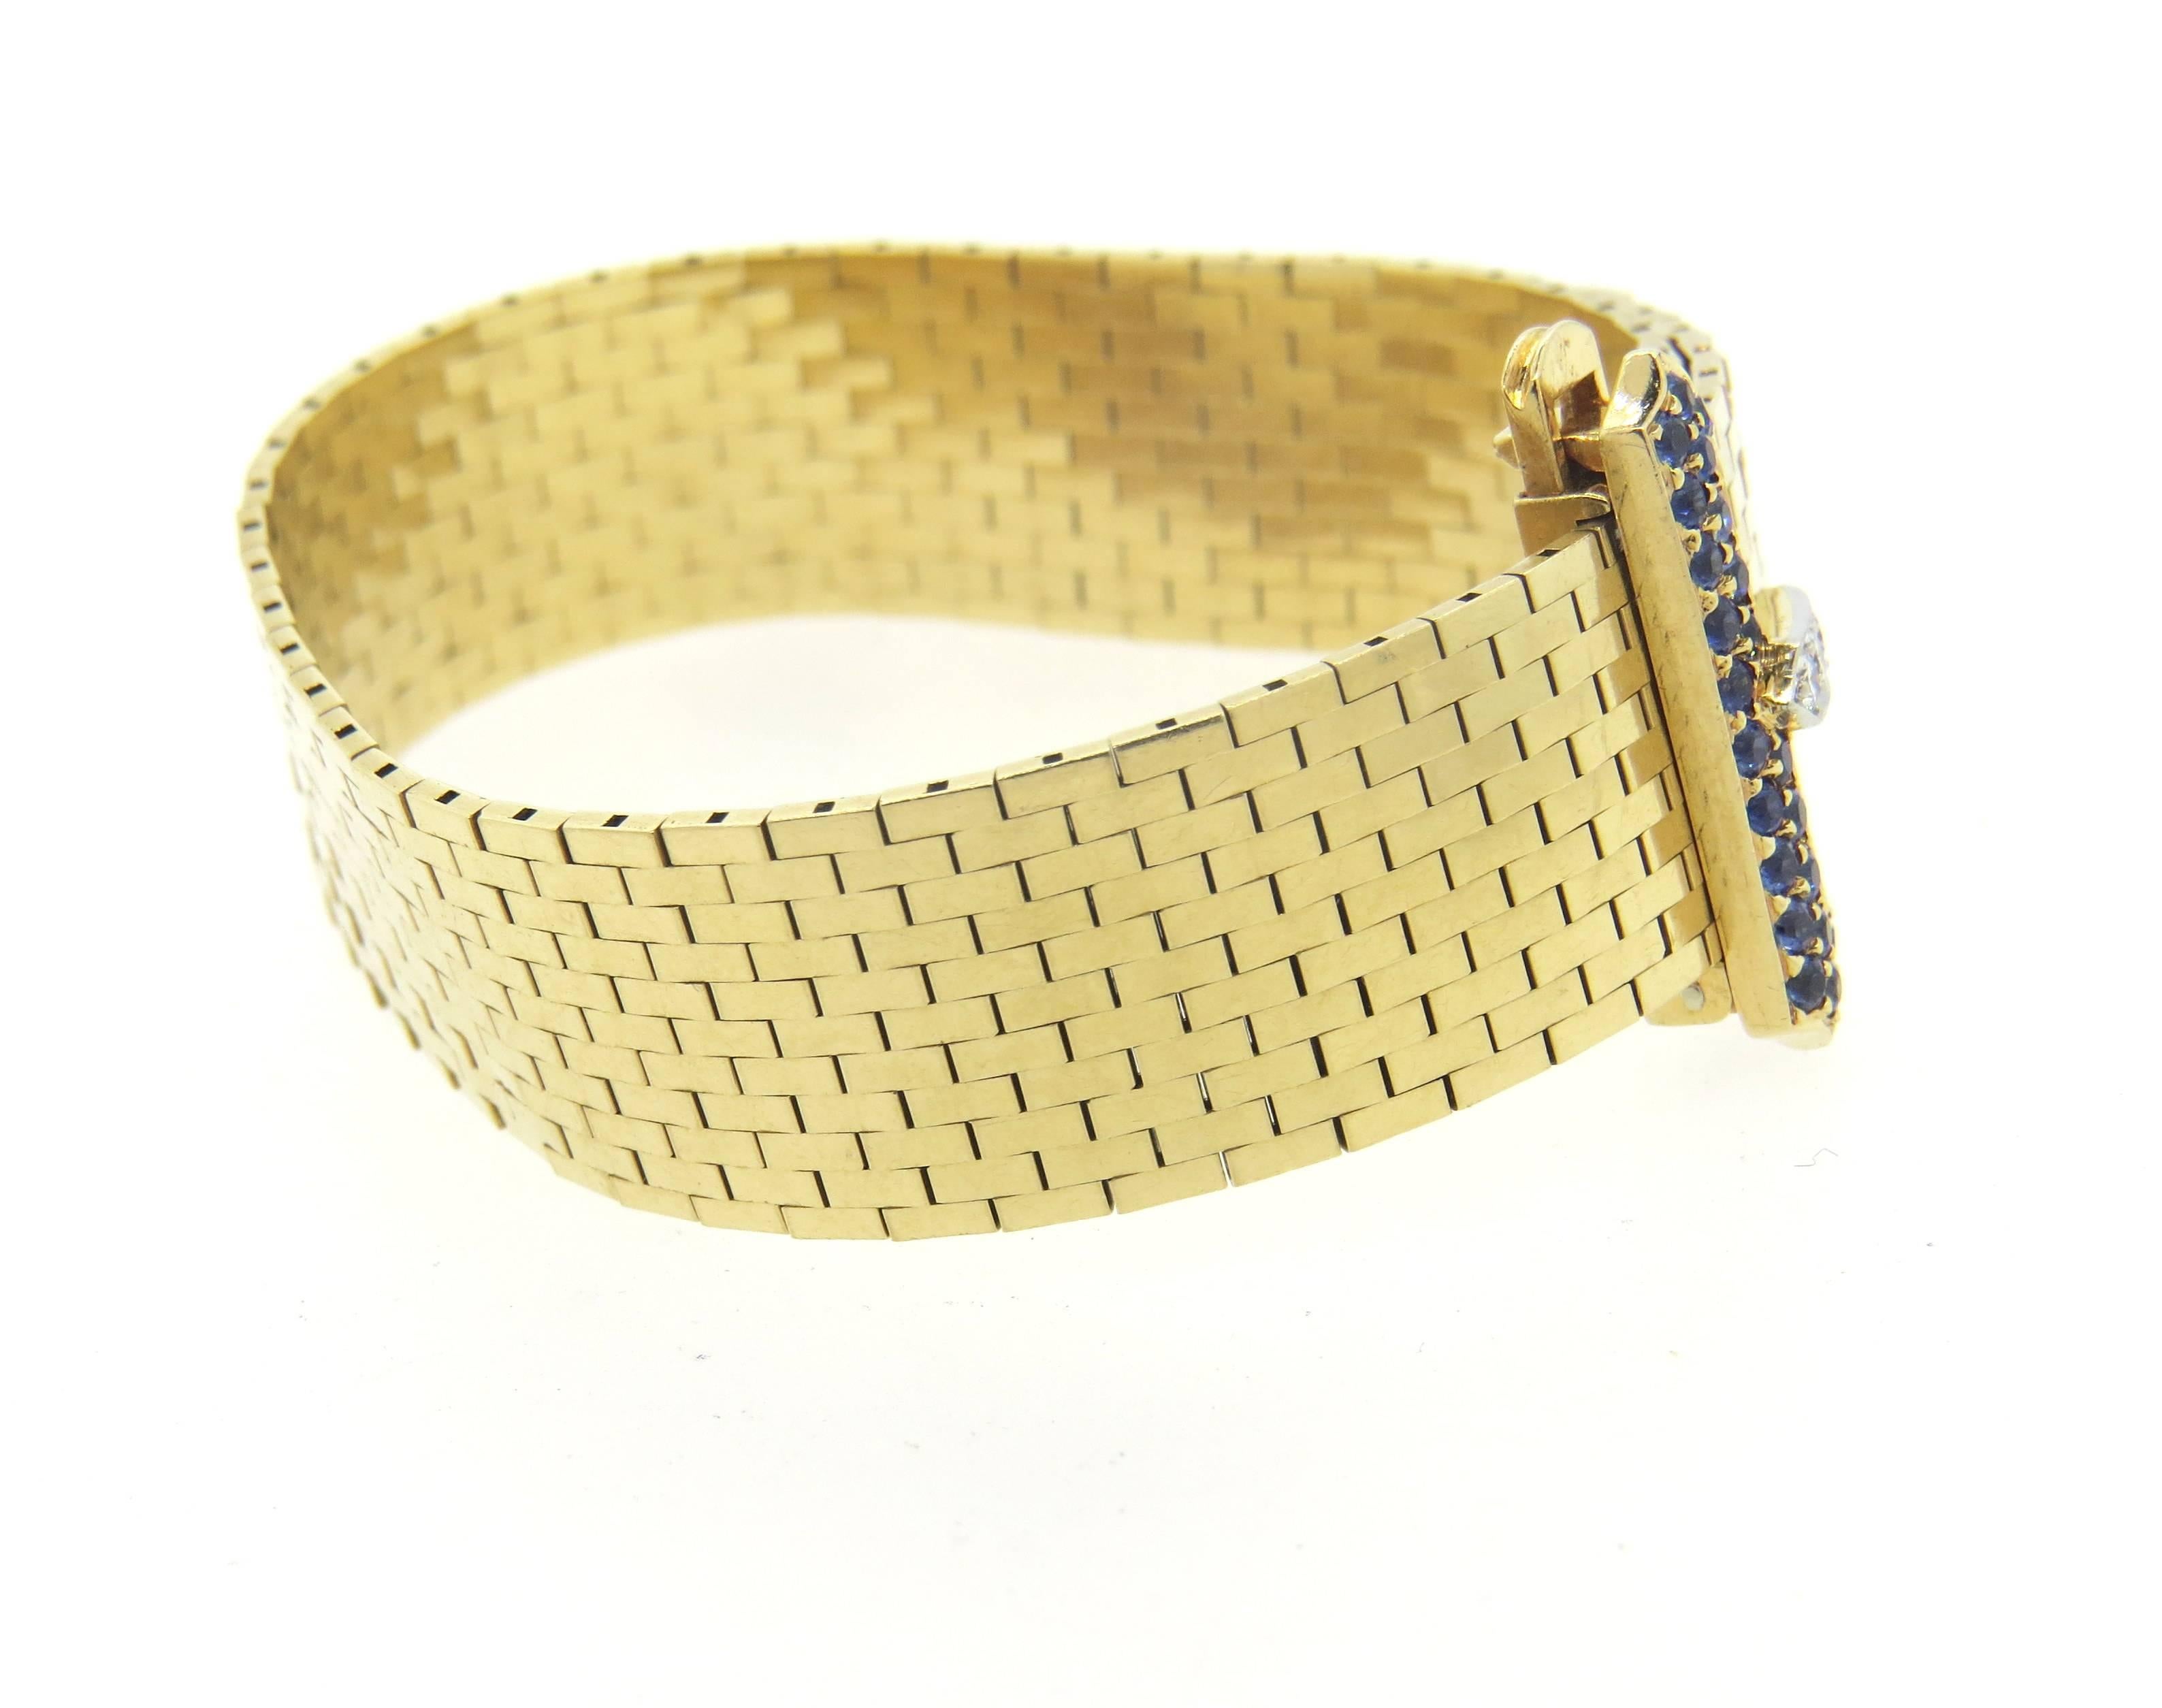 Retro 14k yellow gold bracelet, crafted by Tiffany & Co,decorated with blue sapphires and diamonds on the buckle. Bracelet is 7 7/8